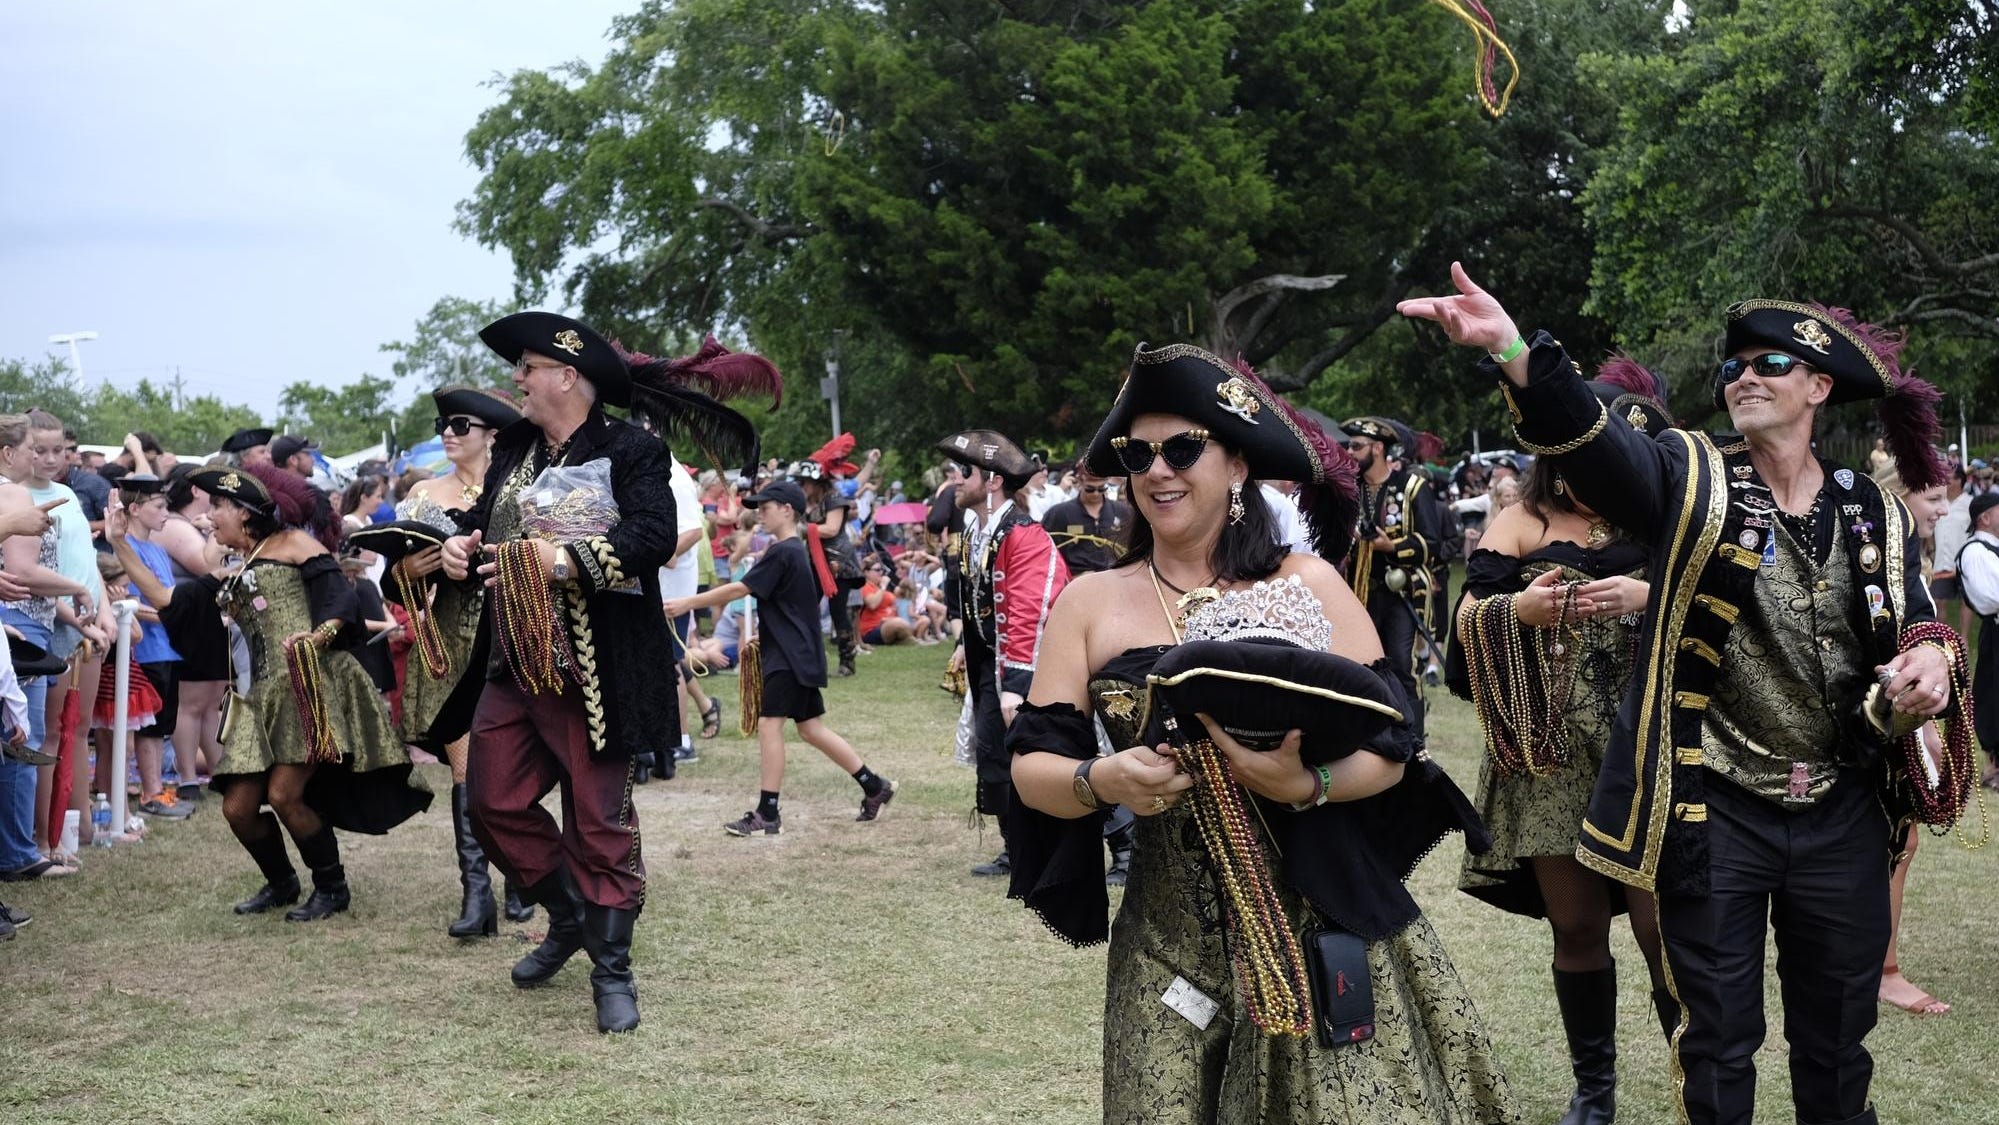 Billy Bowlegs Pirate Festival 2021 dates moved up to help spring tourism